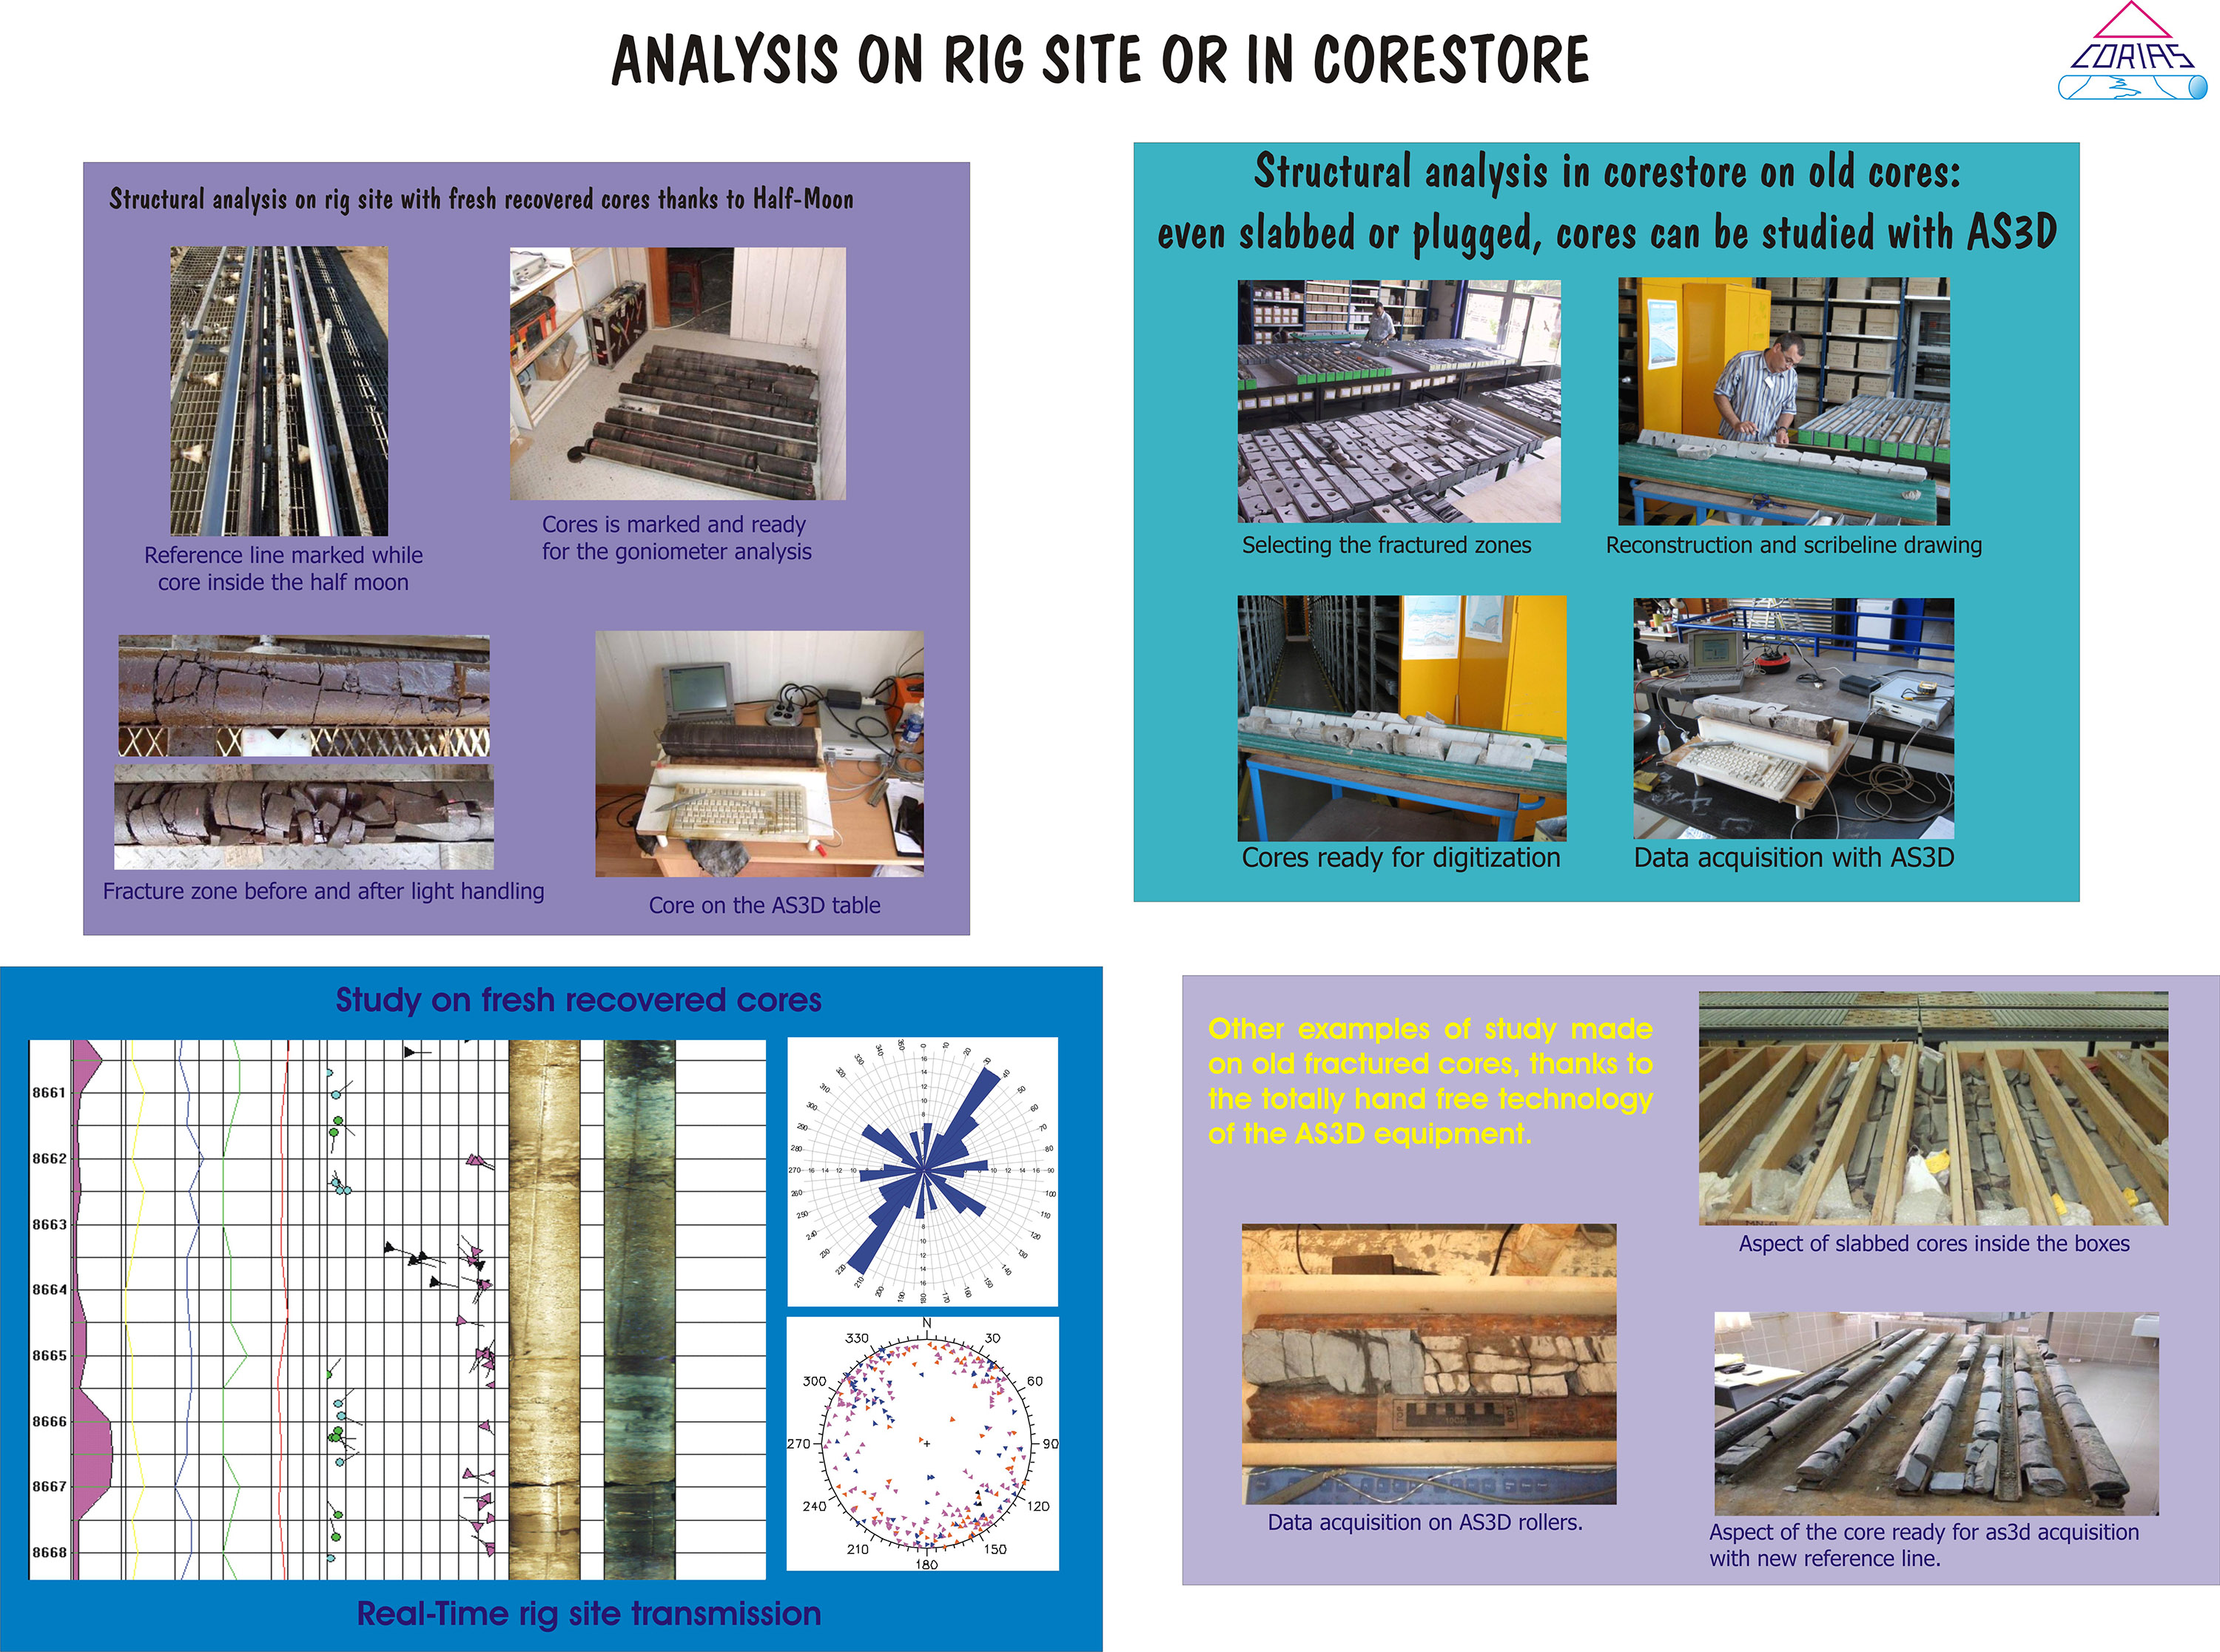 Corias Analysis on rig site or in corestore